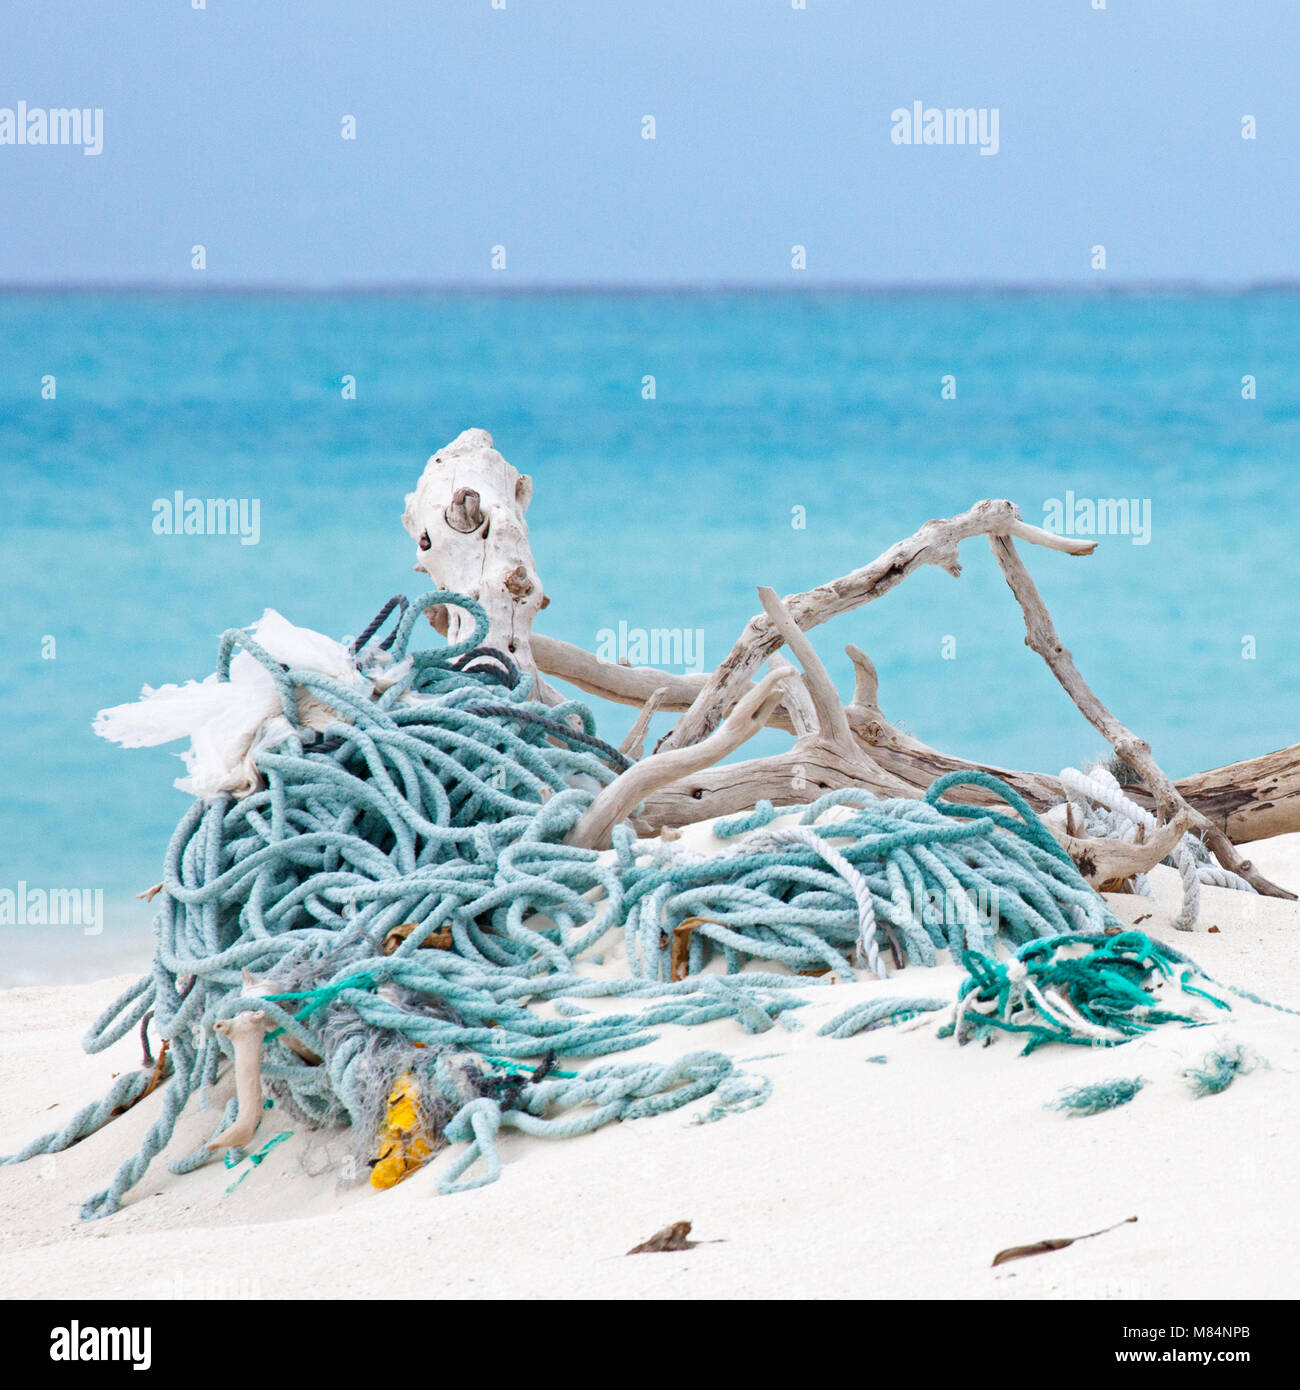 Ropes and nets at water edge after being washed ashore by ocean currents on a North Pacific island Stock Photo